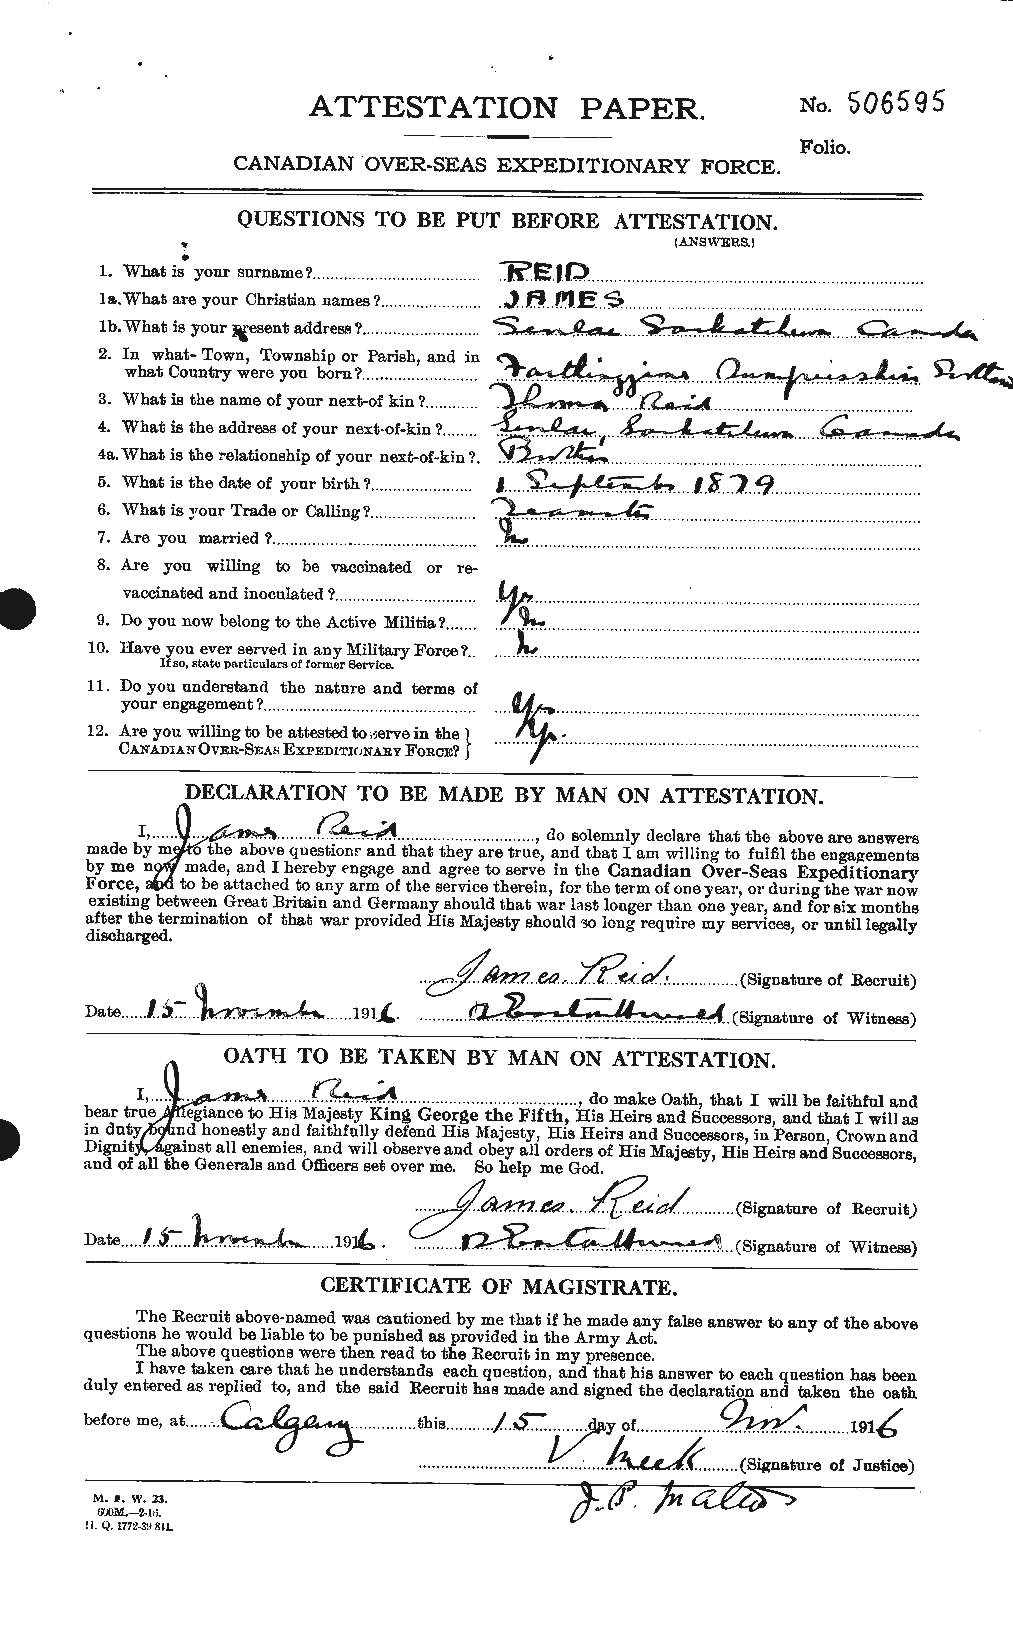 Personnel Records of the First World War - CEF 598684a